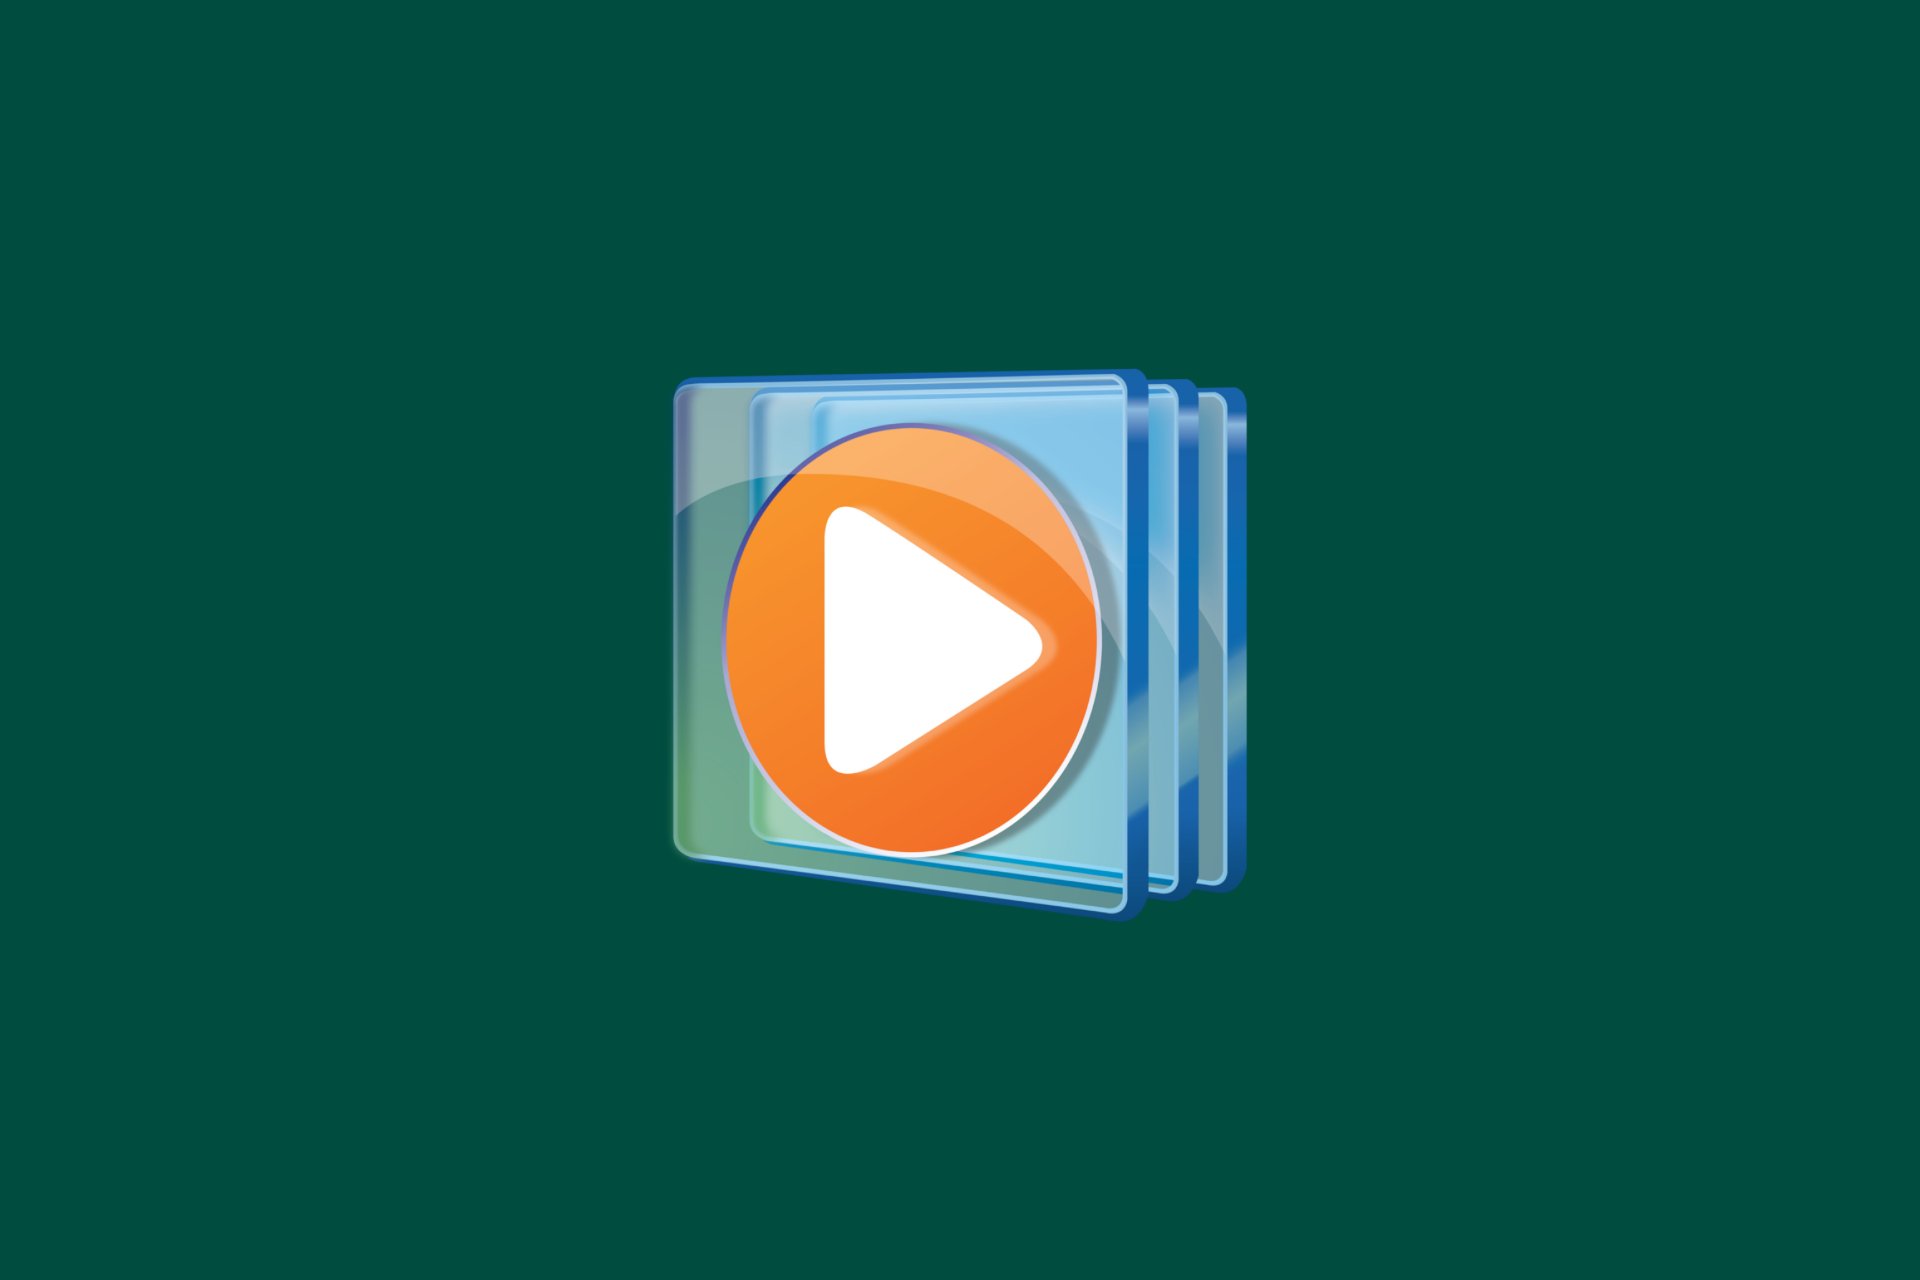 What by Windows Media Player?